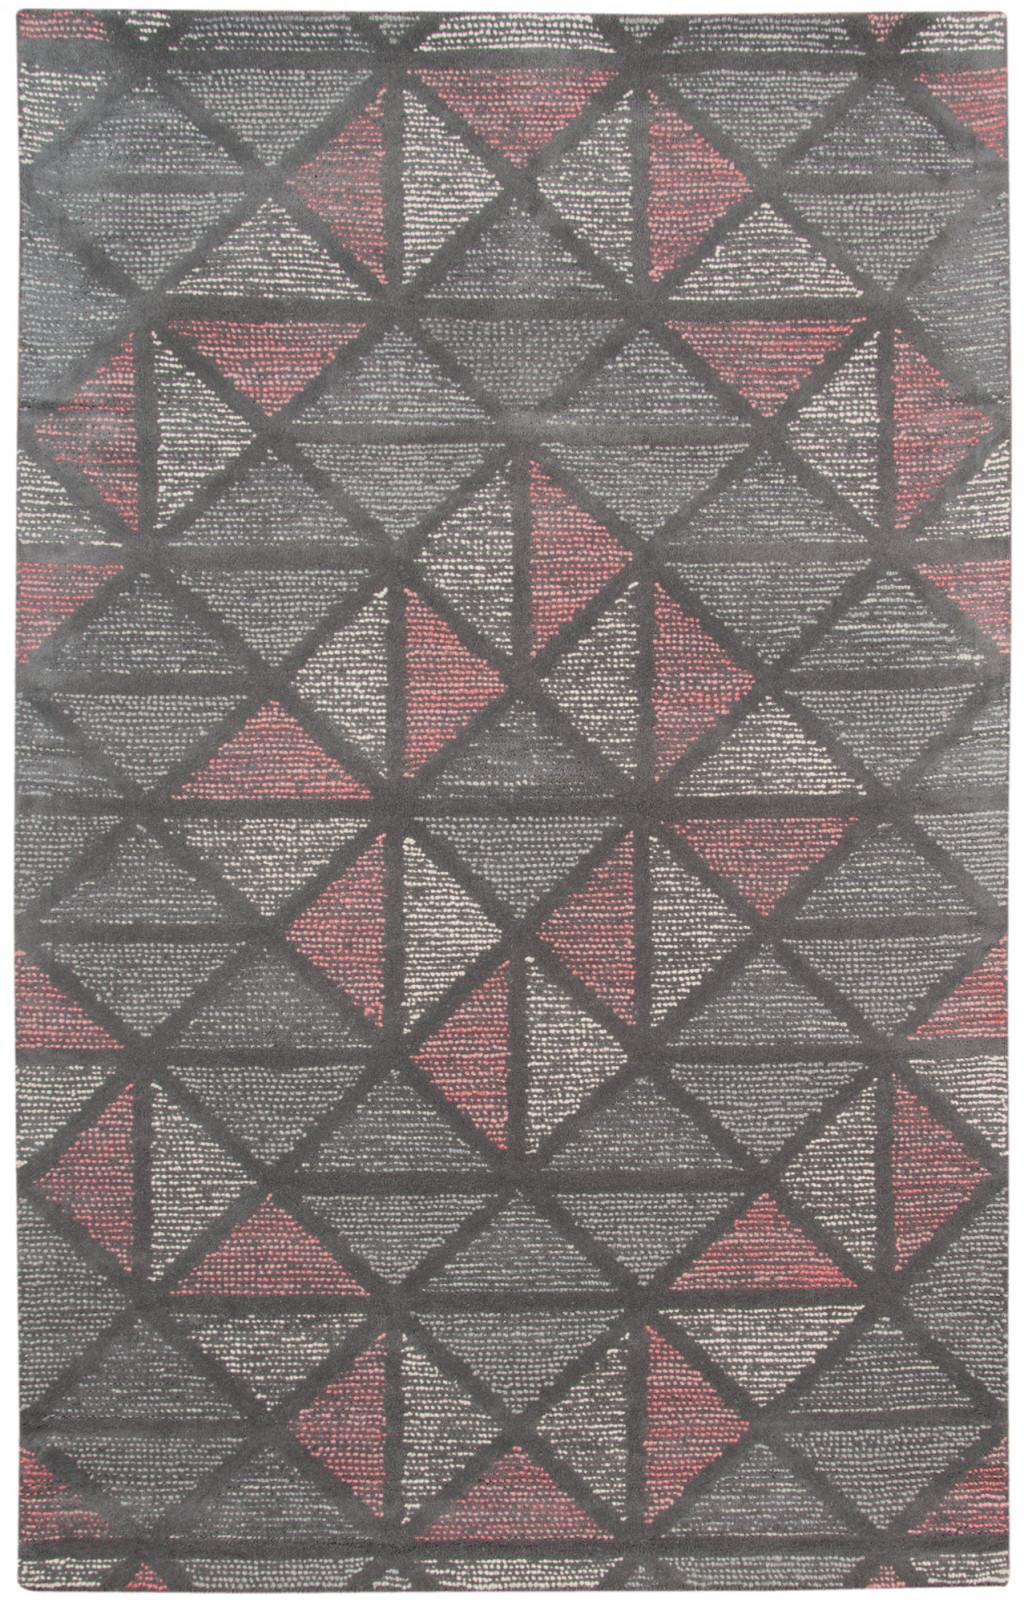 8' X 11' Pink And Gray New Zealand Lambs Wool Geometric Tufted Area Rug